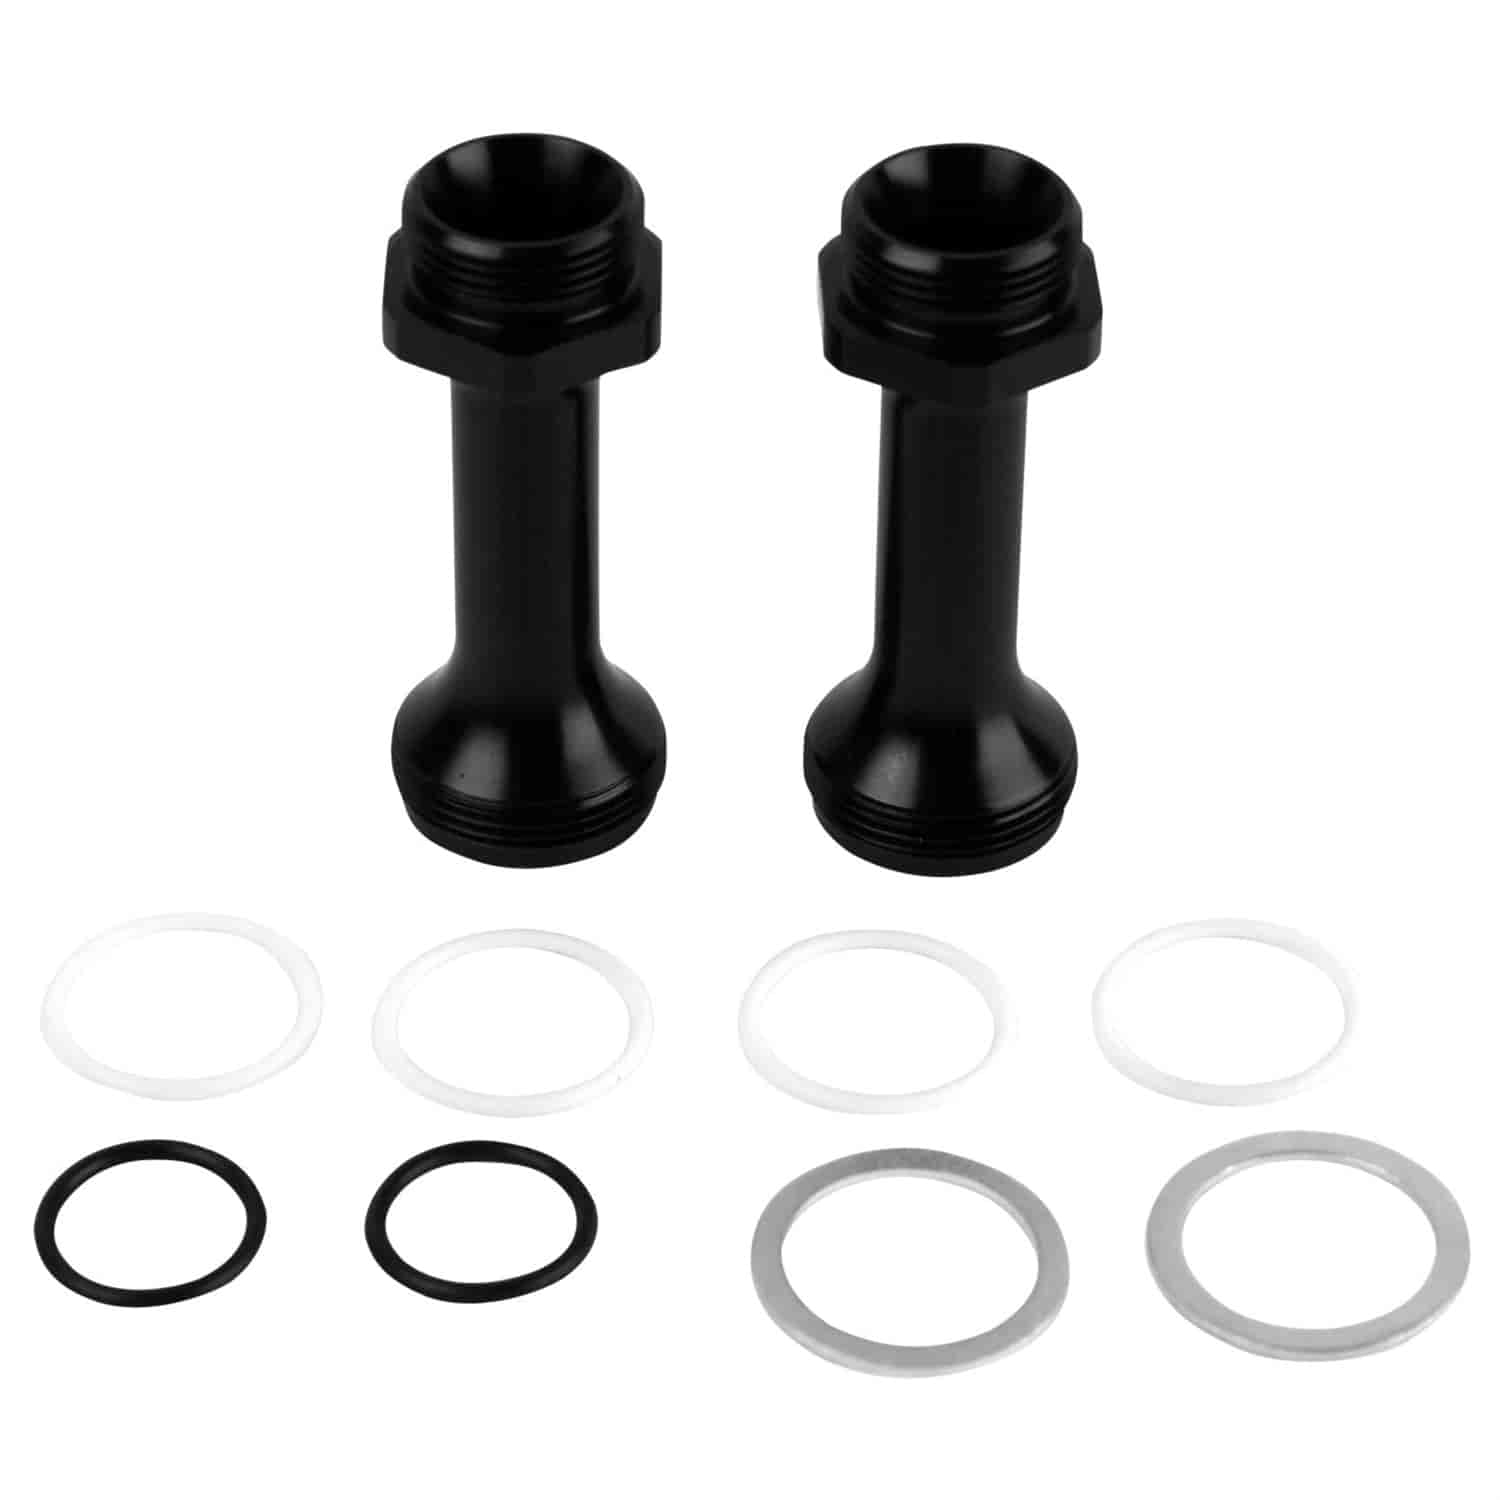 Fuel Log Coversion Kit Coverts Demon to Holley 4150/4500